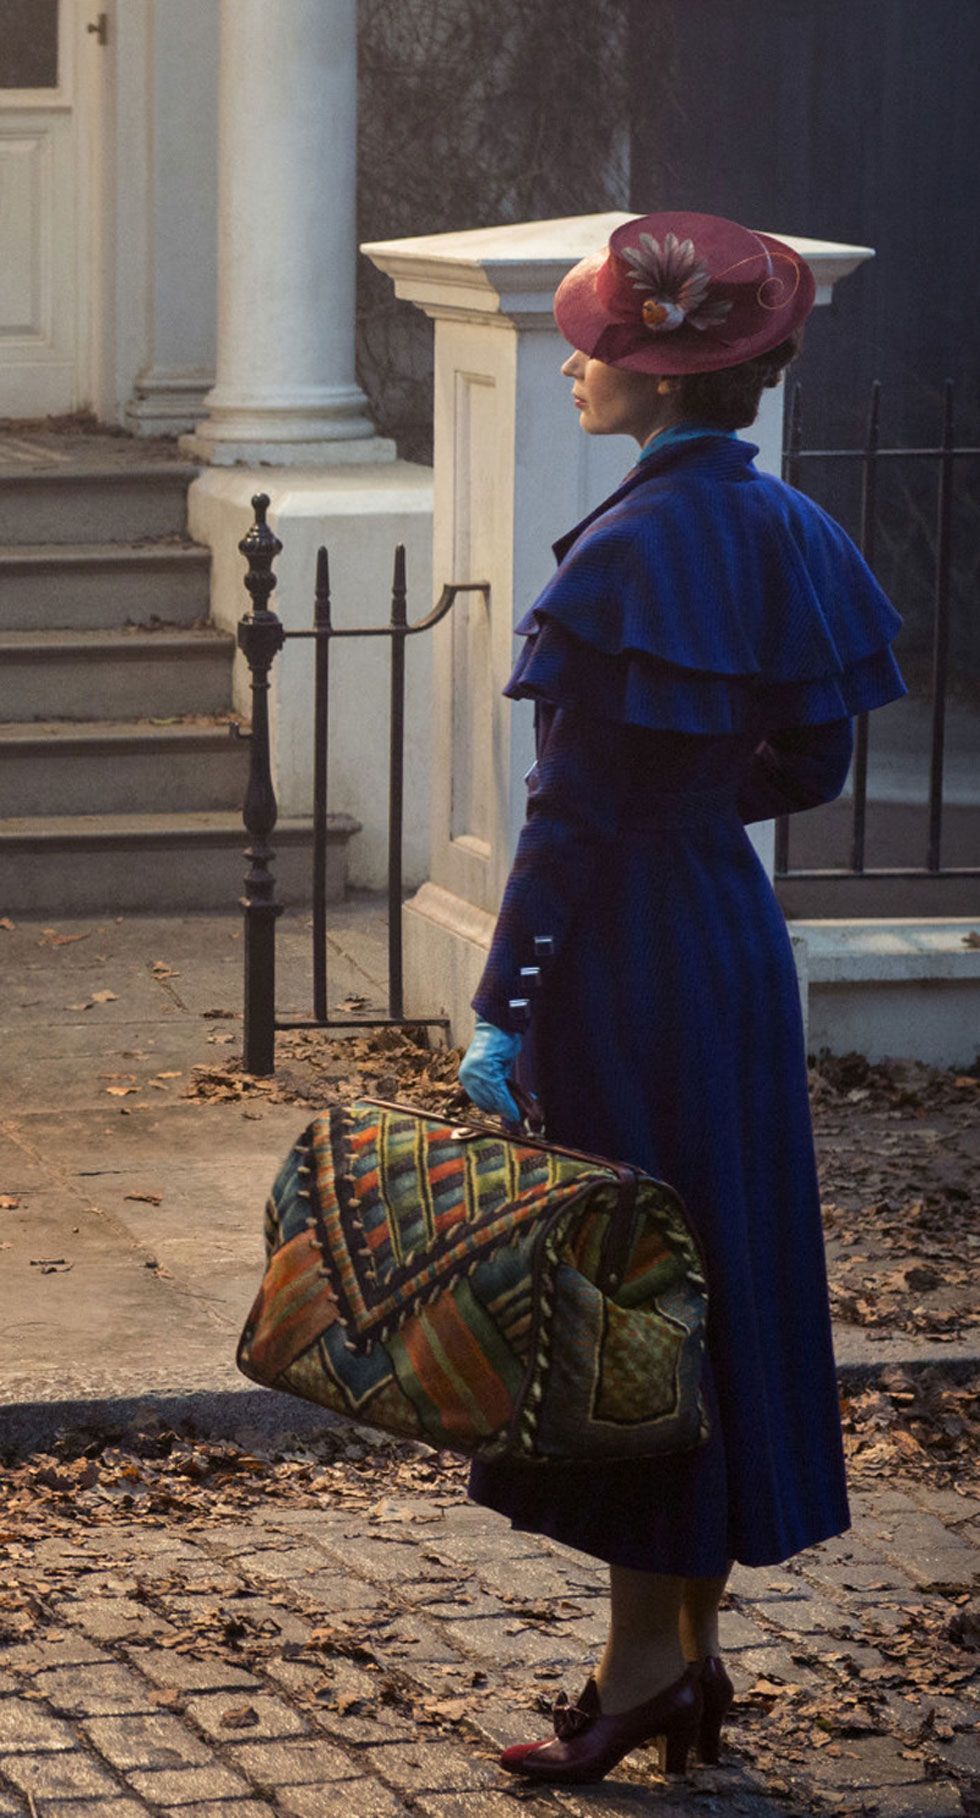 Emily Blunt stars in the Mary Poppins Returns sequel